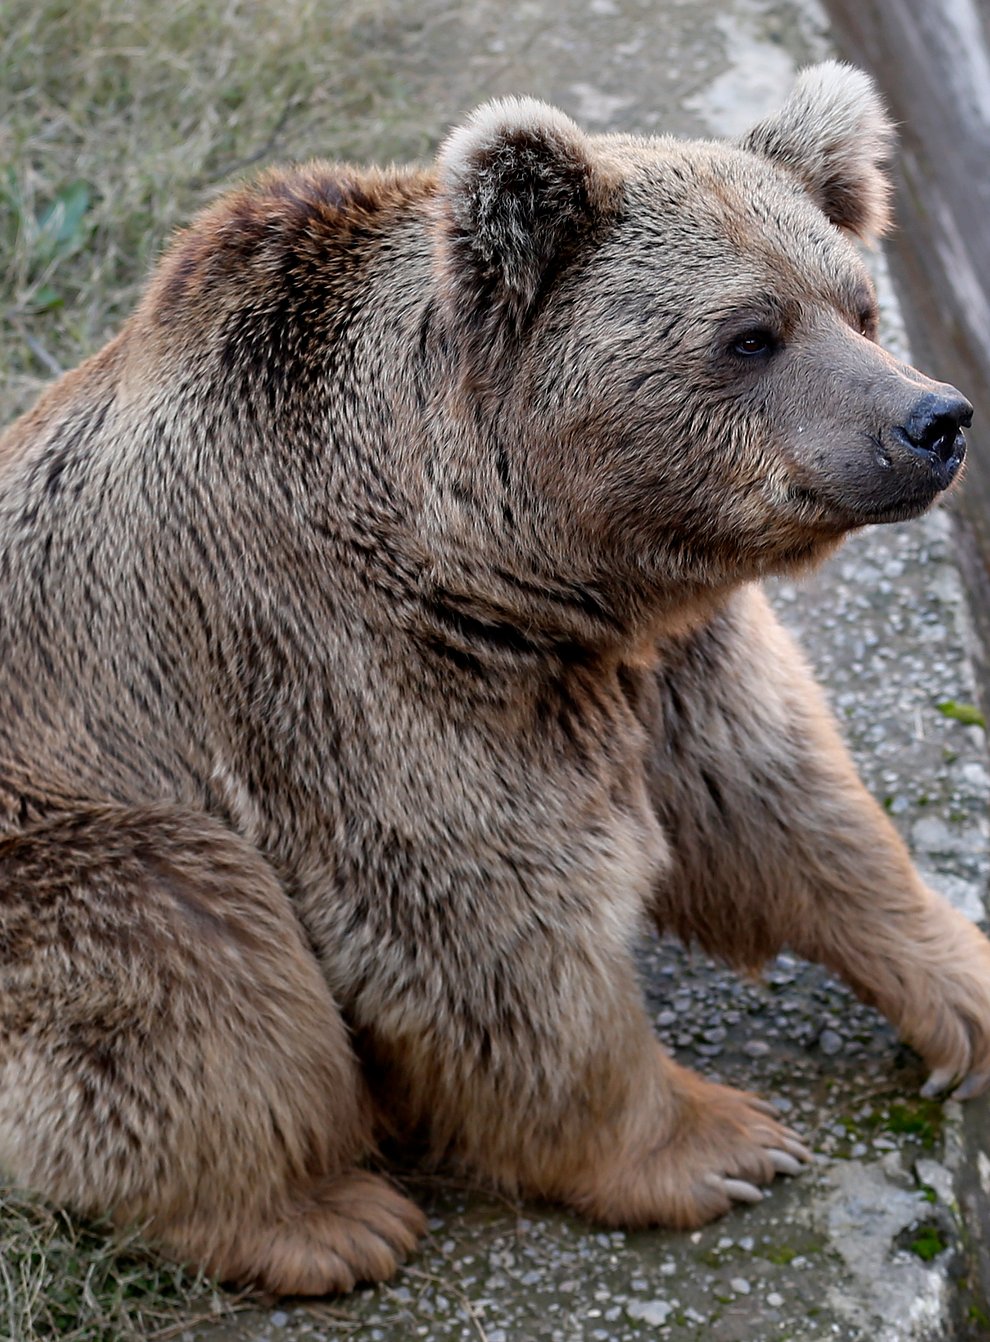 A sick brown bear sits at his enclosure in the Marghazar Zoo